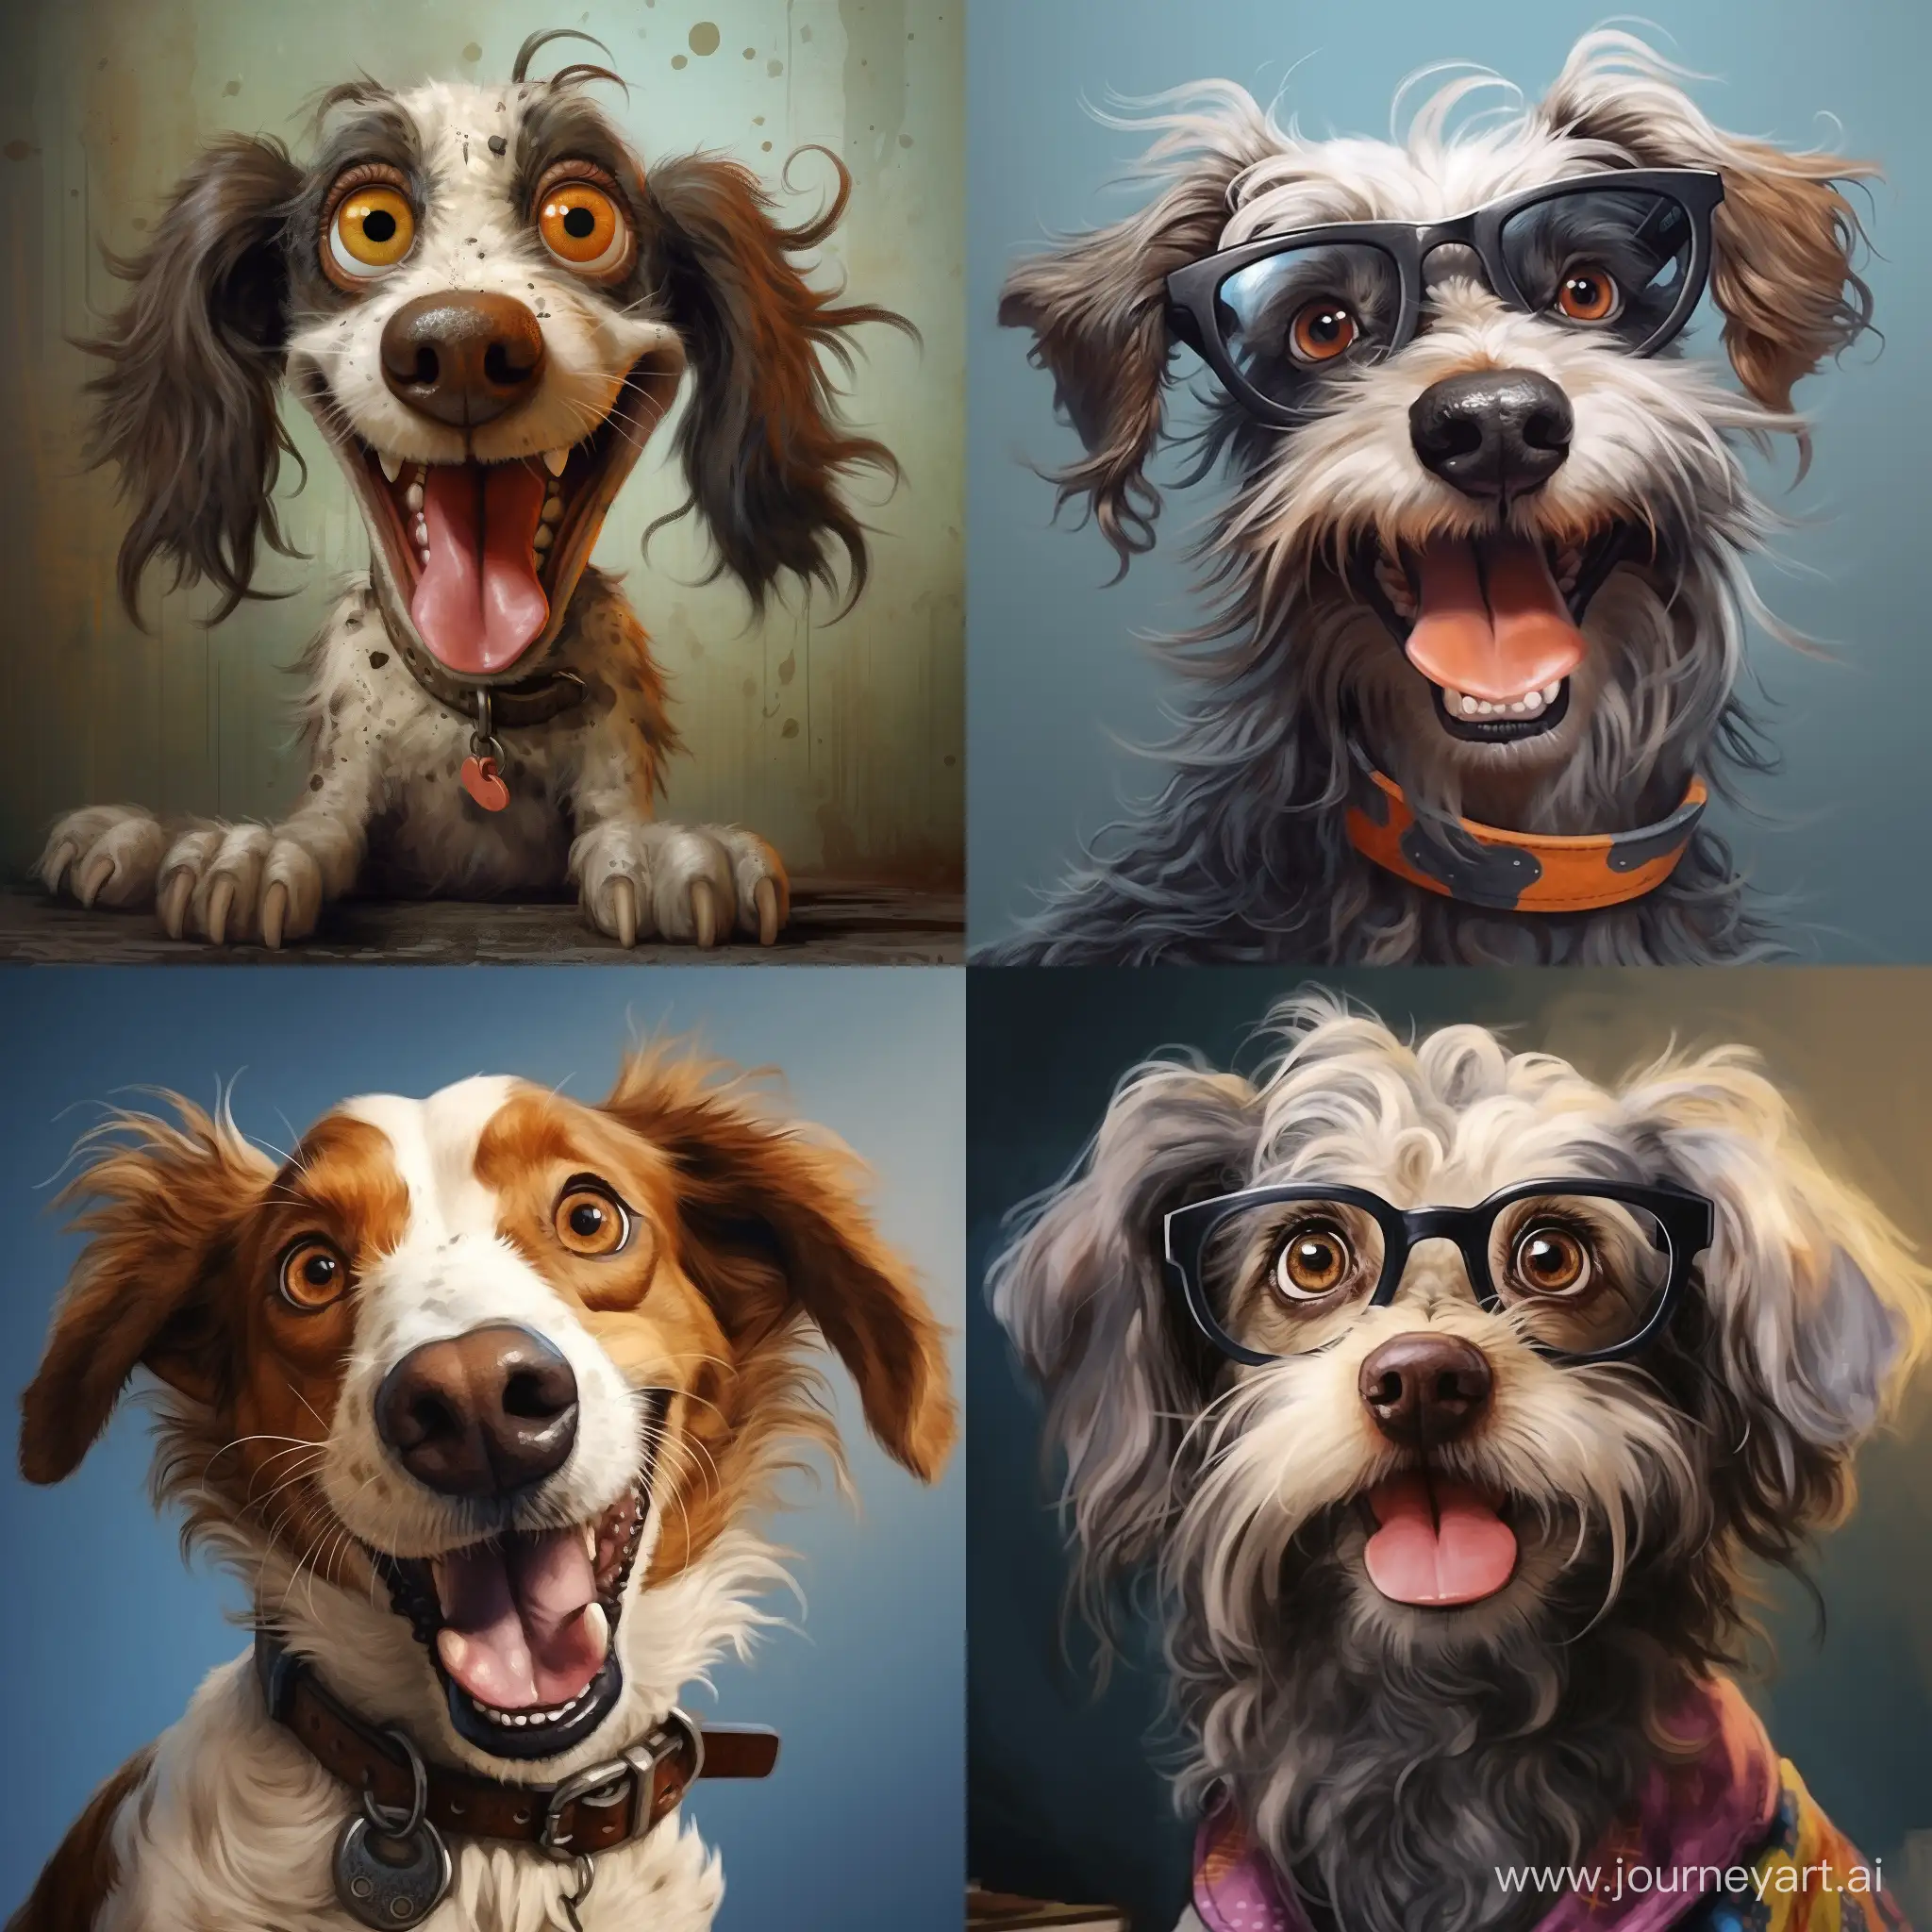 Hilarious-Dog-Expressions-in-Square-Aspect-Ratio